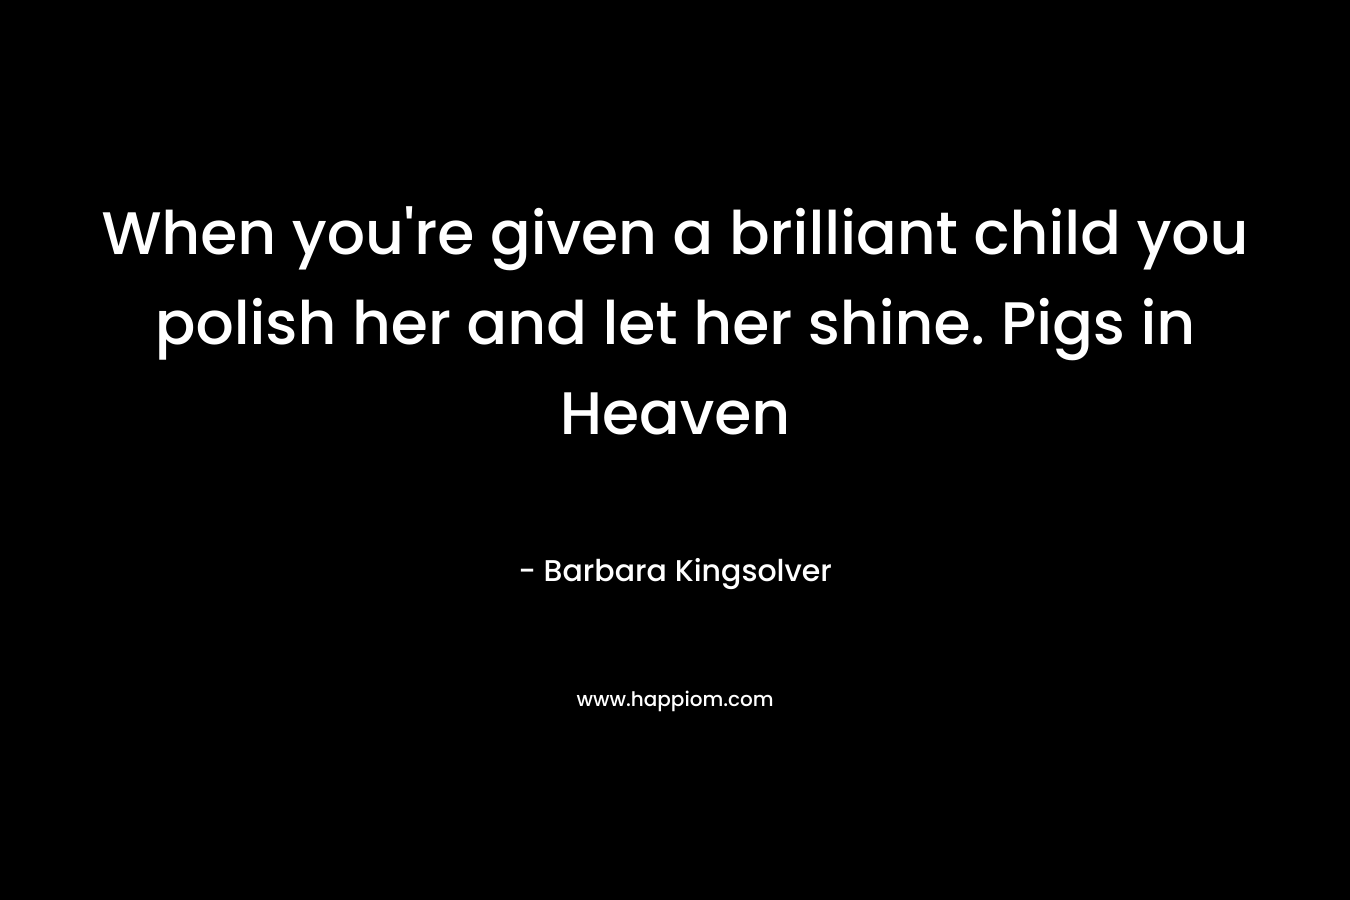 When you're given a brilliant child you polish her and let her shine. Pigs in Heaven